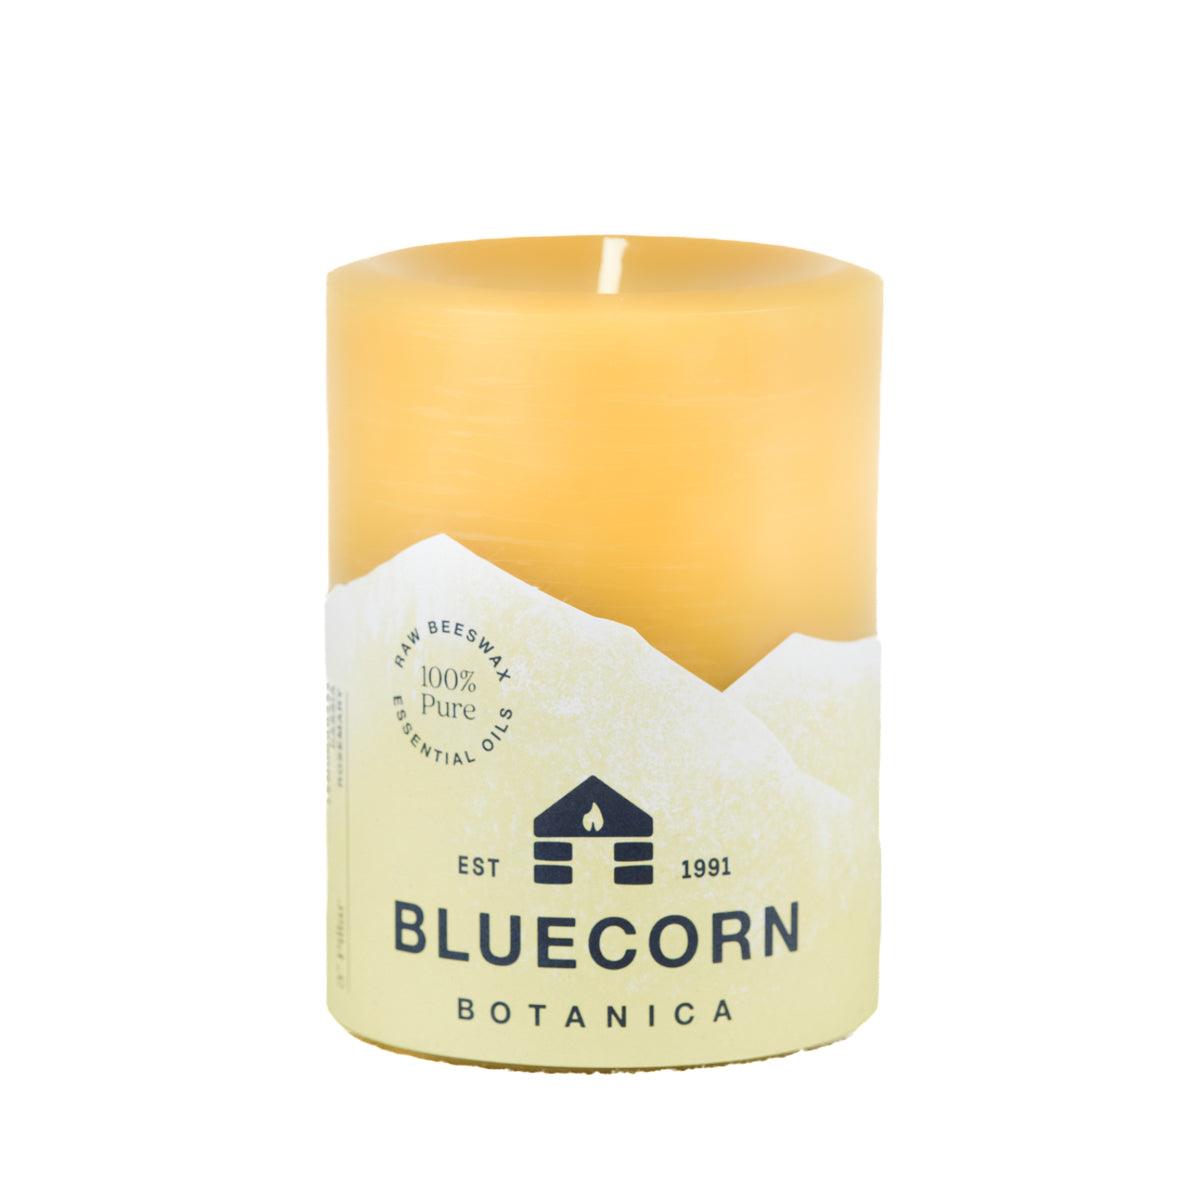  Cypress & Sandalwood Essential Oil & Pure Beeswax Candle in  Blown Glass Vessel. Bluecorn Beeswax Botanica. Non-Toxic Scented Candle in  100% Recycled Glass. 8 oz. : Home & Kitchen